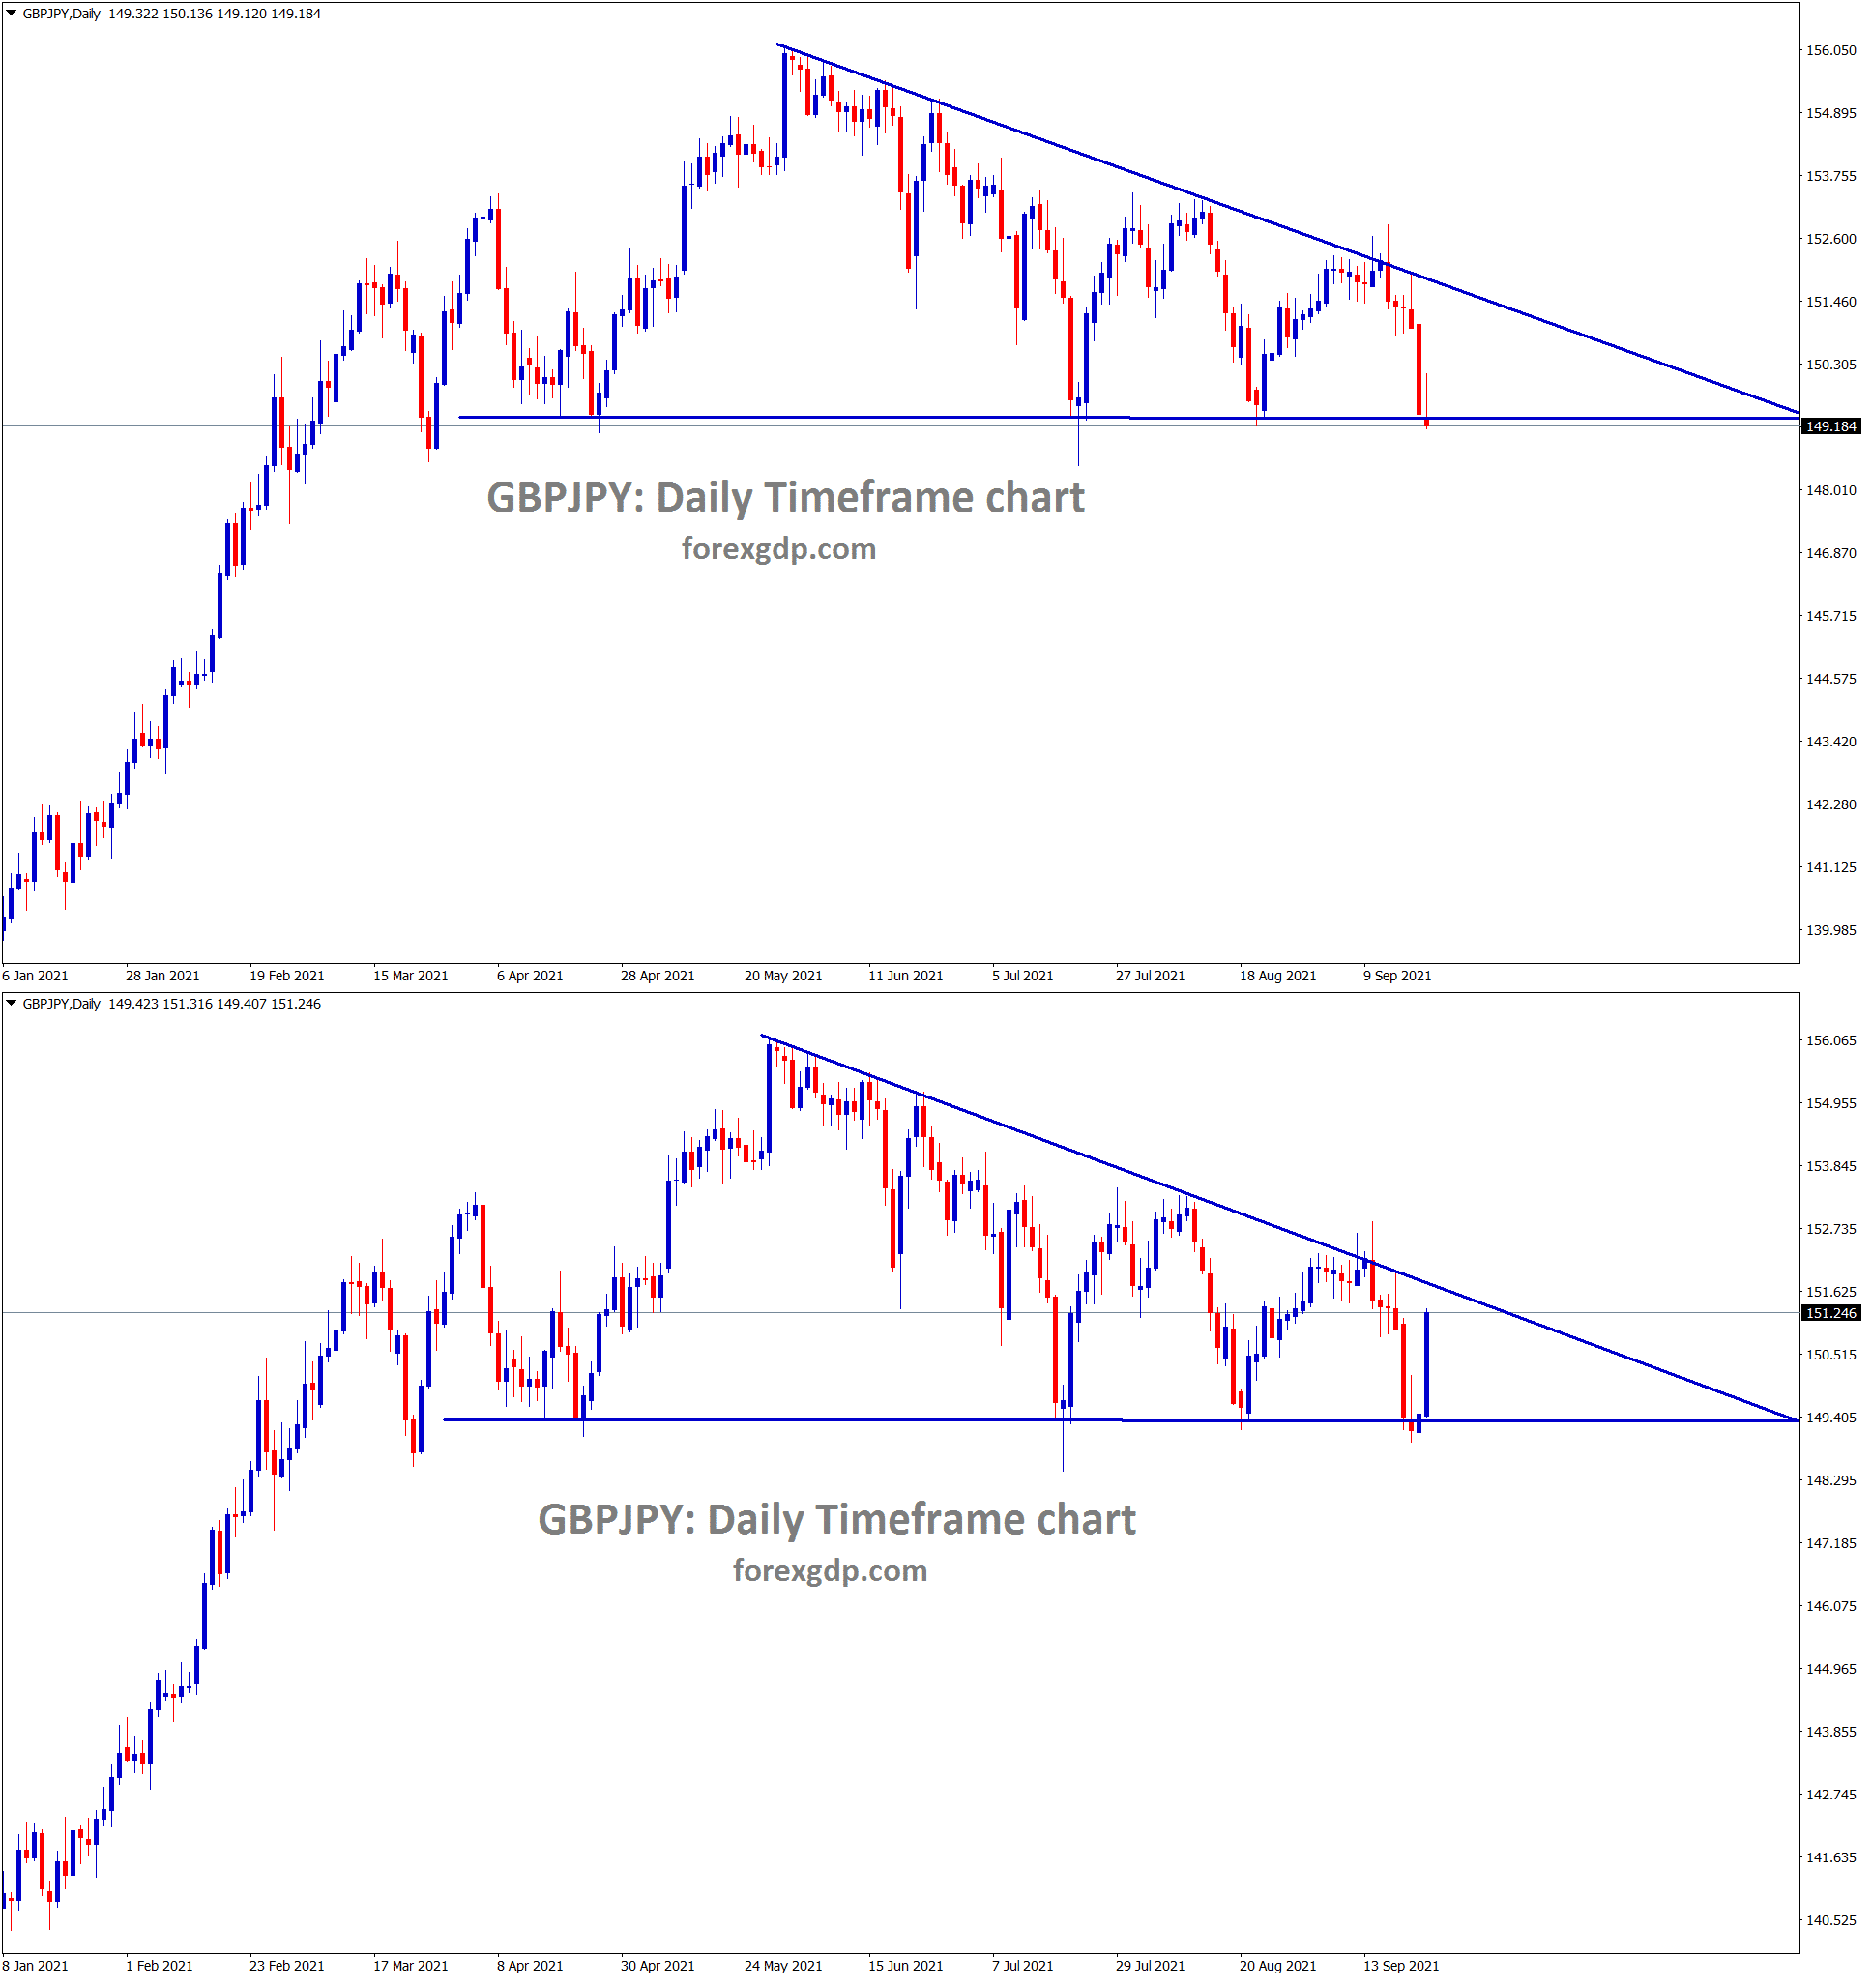 GBPJPY rebound exactly from the support area of the descending triangle pattern